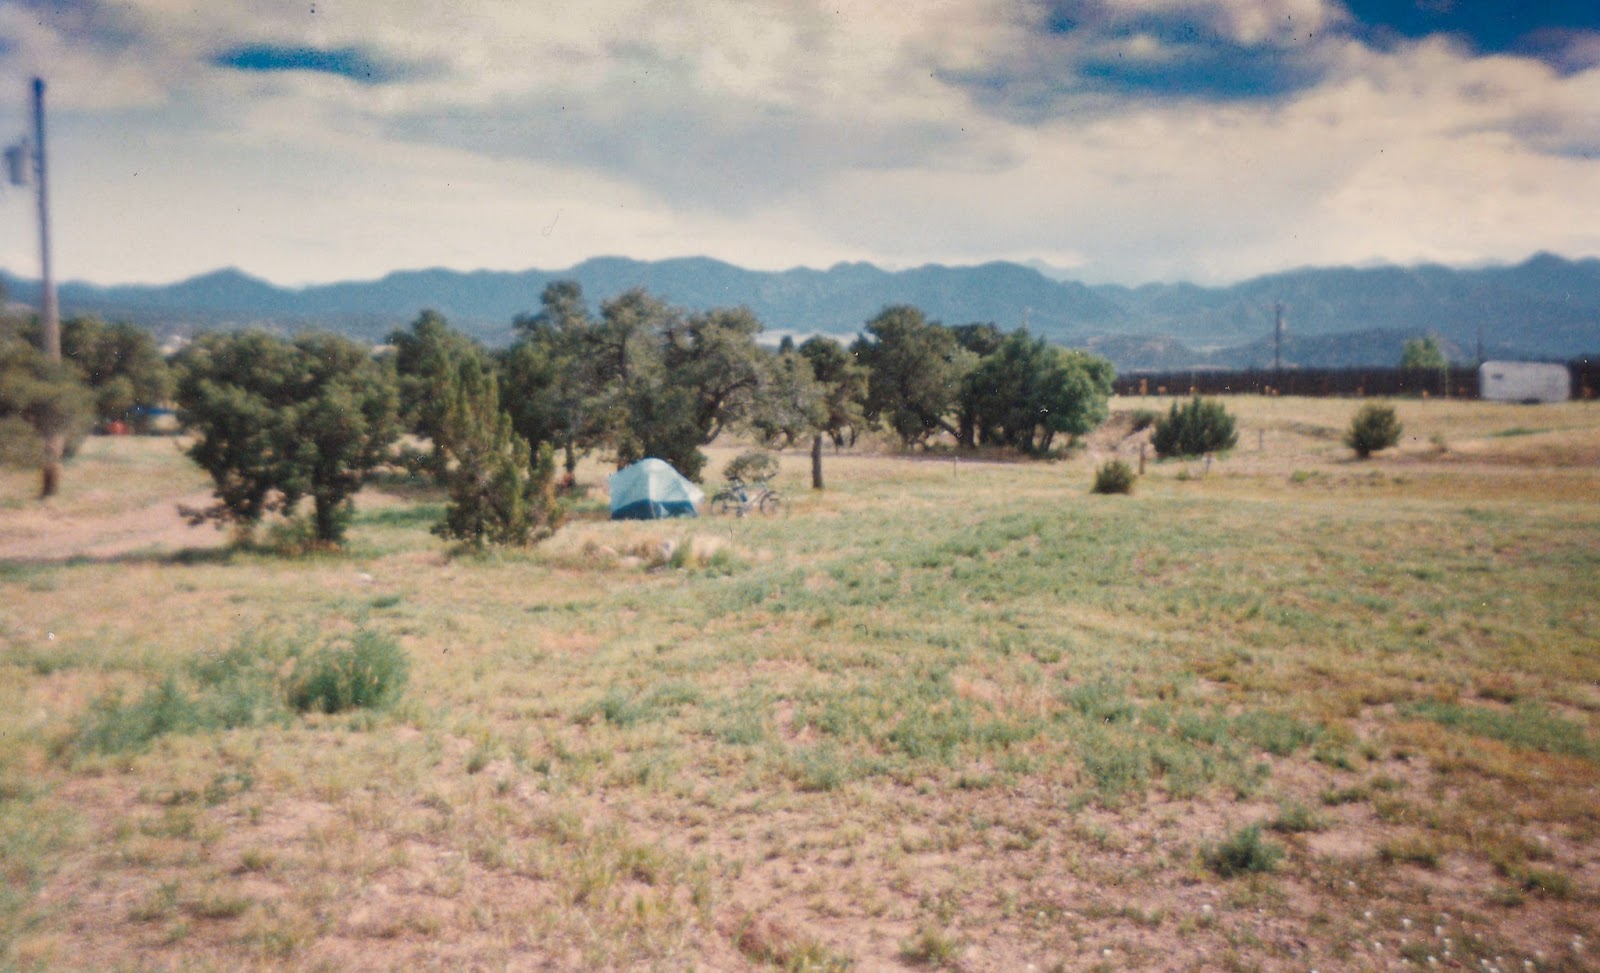 Blue domed tent with bicycle nearby and distant mountains on the horizon. 